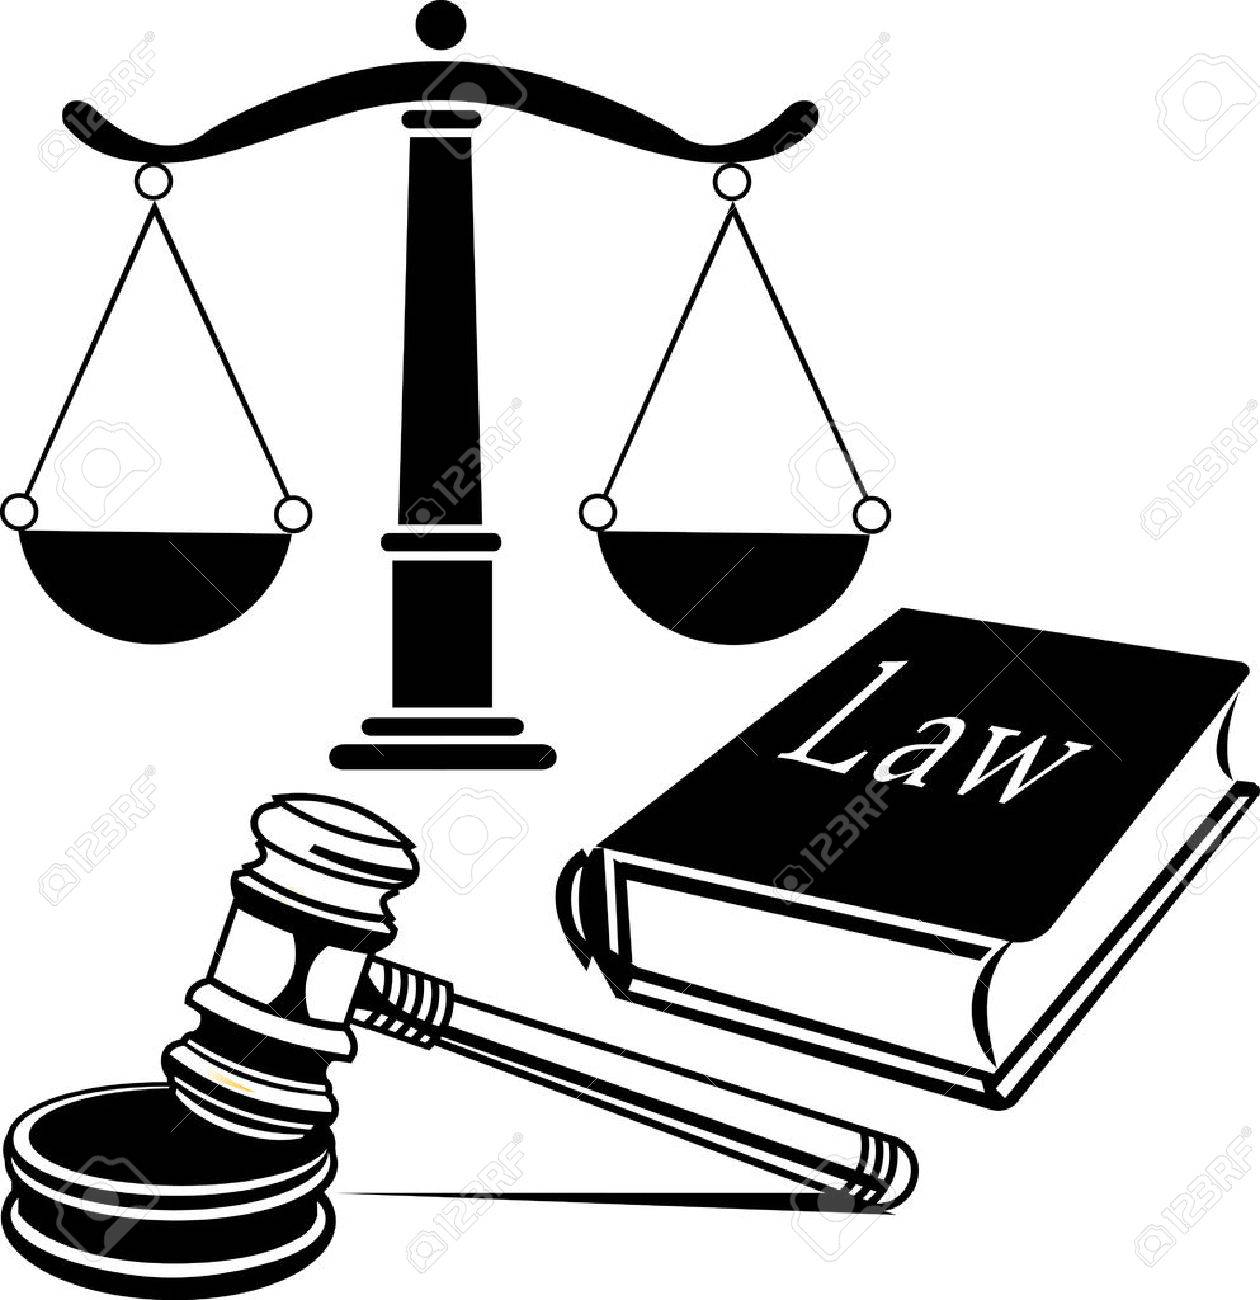 law clipart black and white